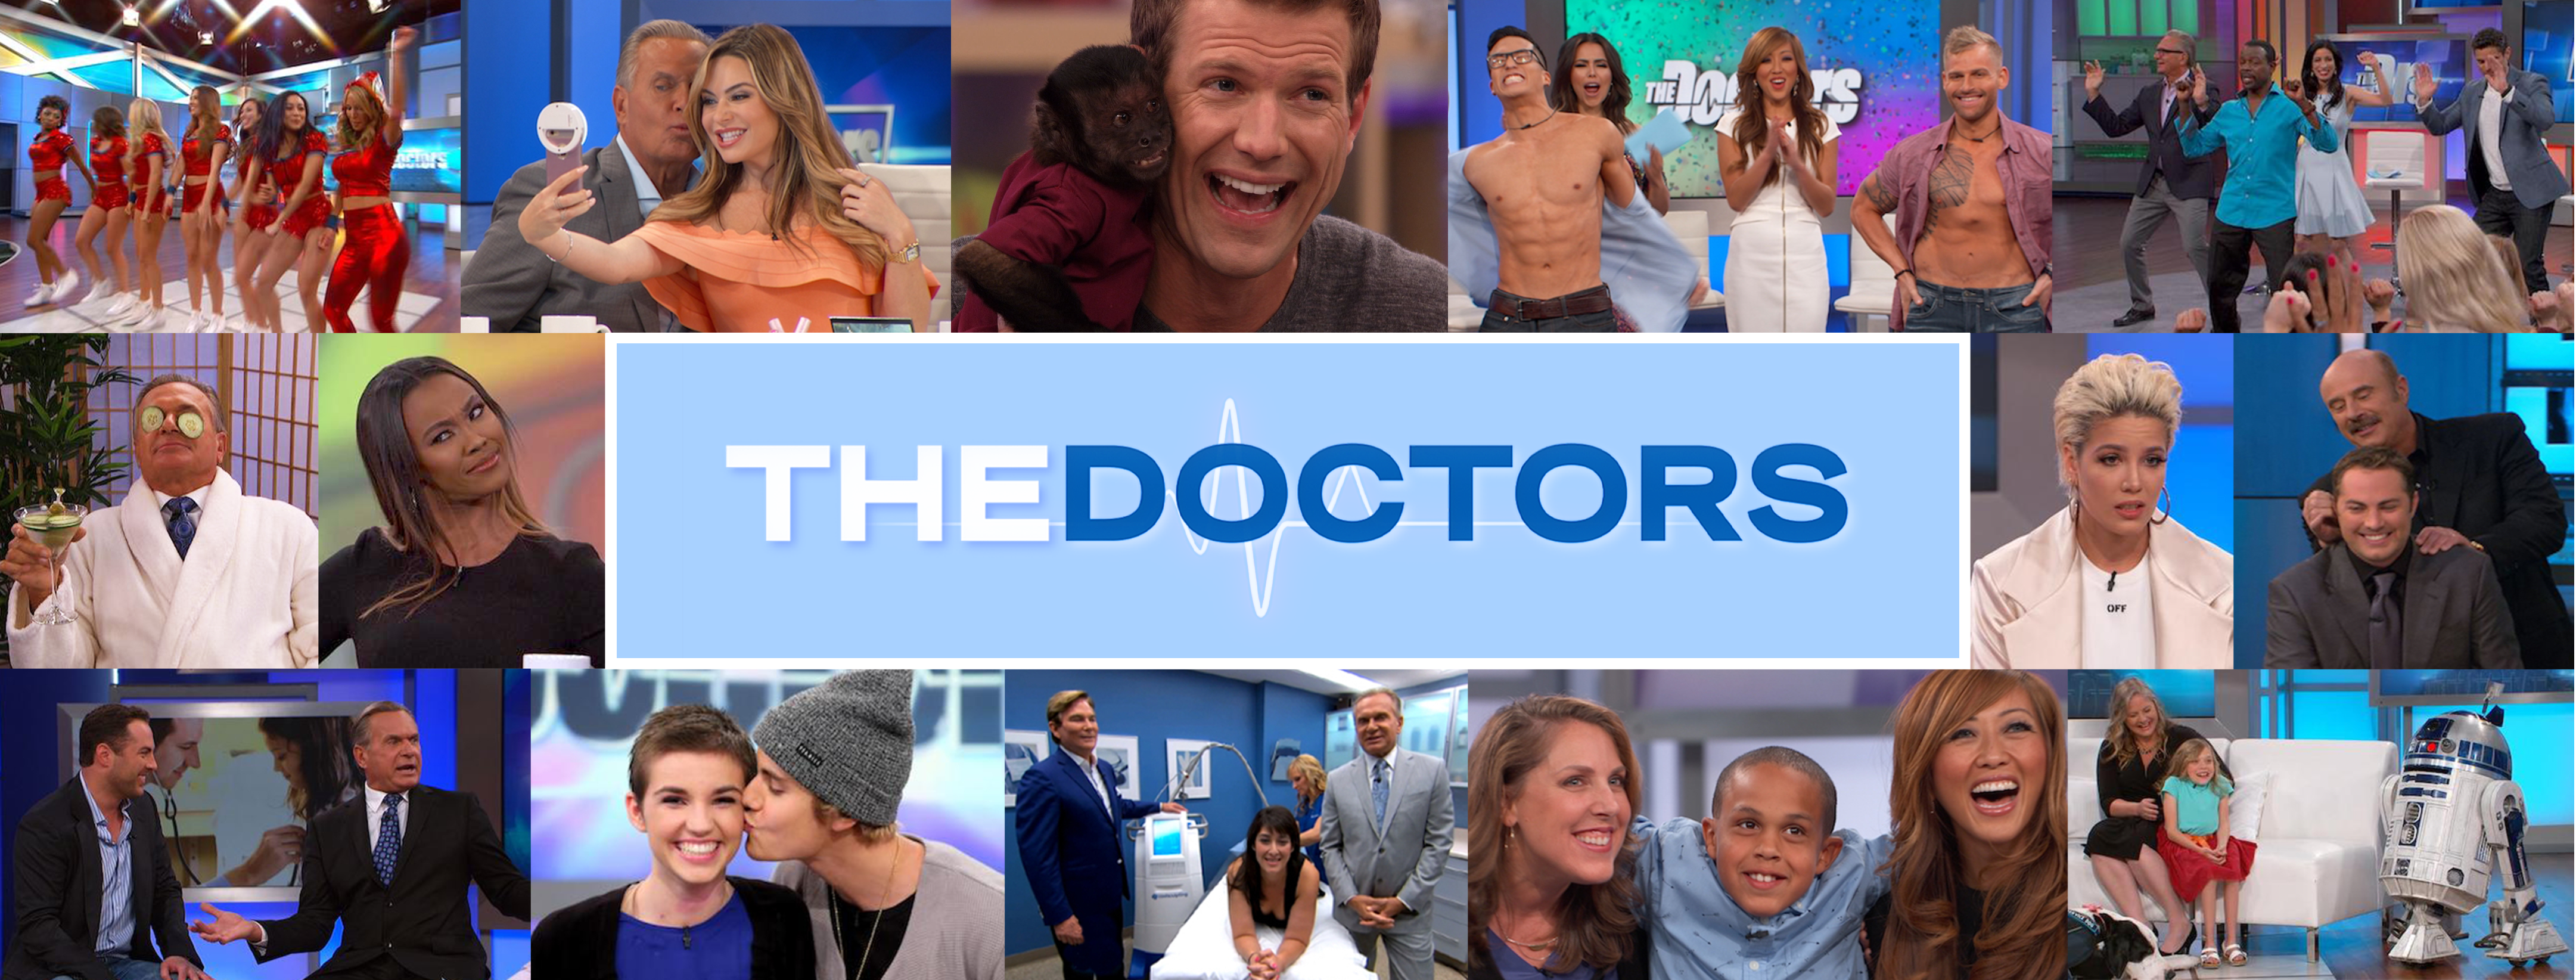 How to Find a Good Nanny | The Doctors TV Show